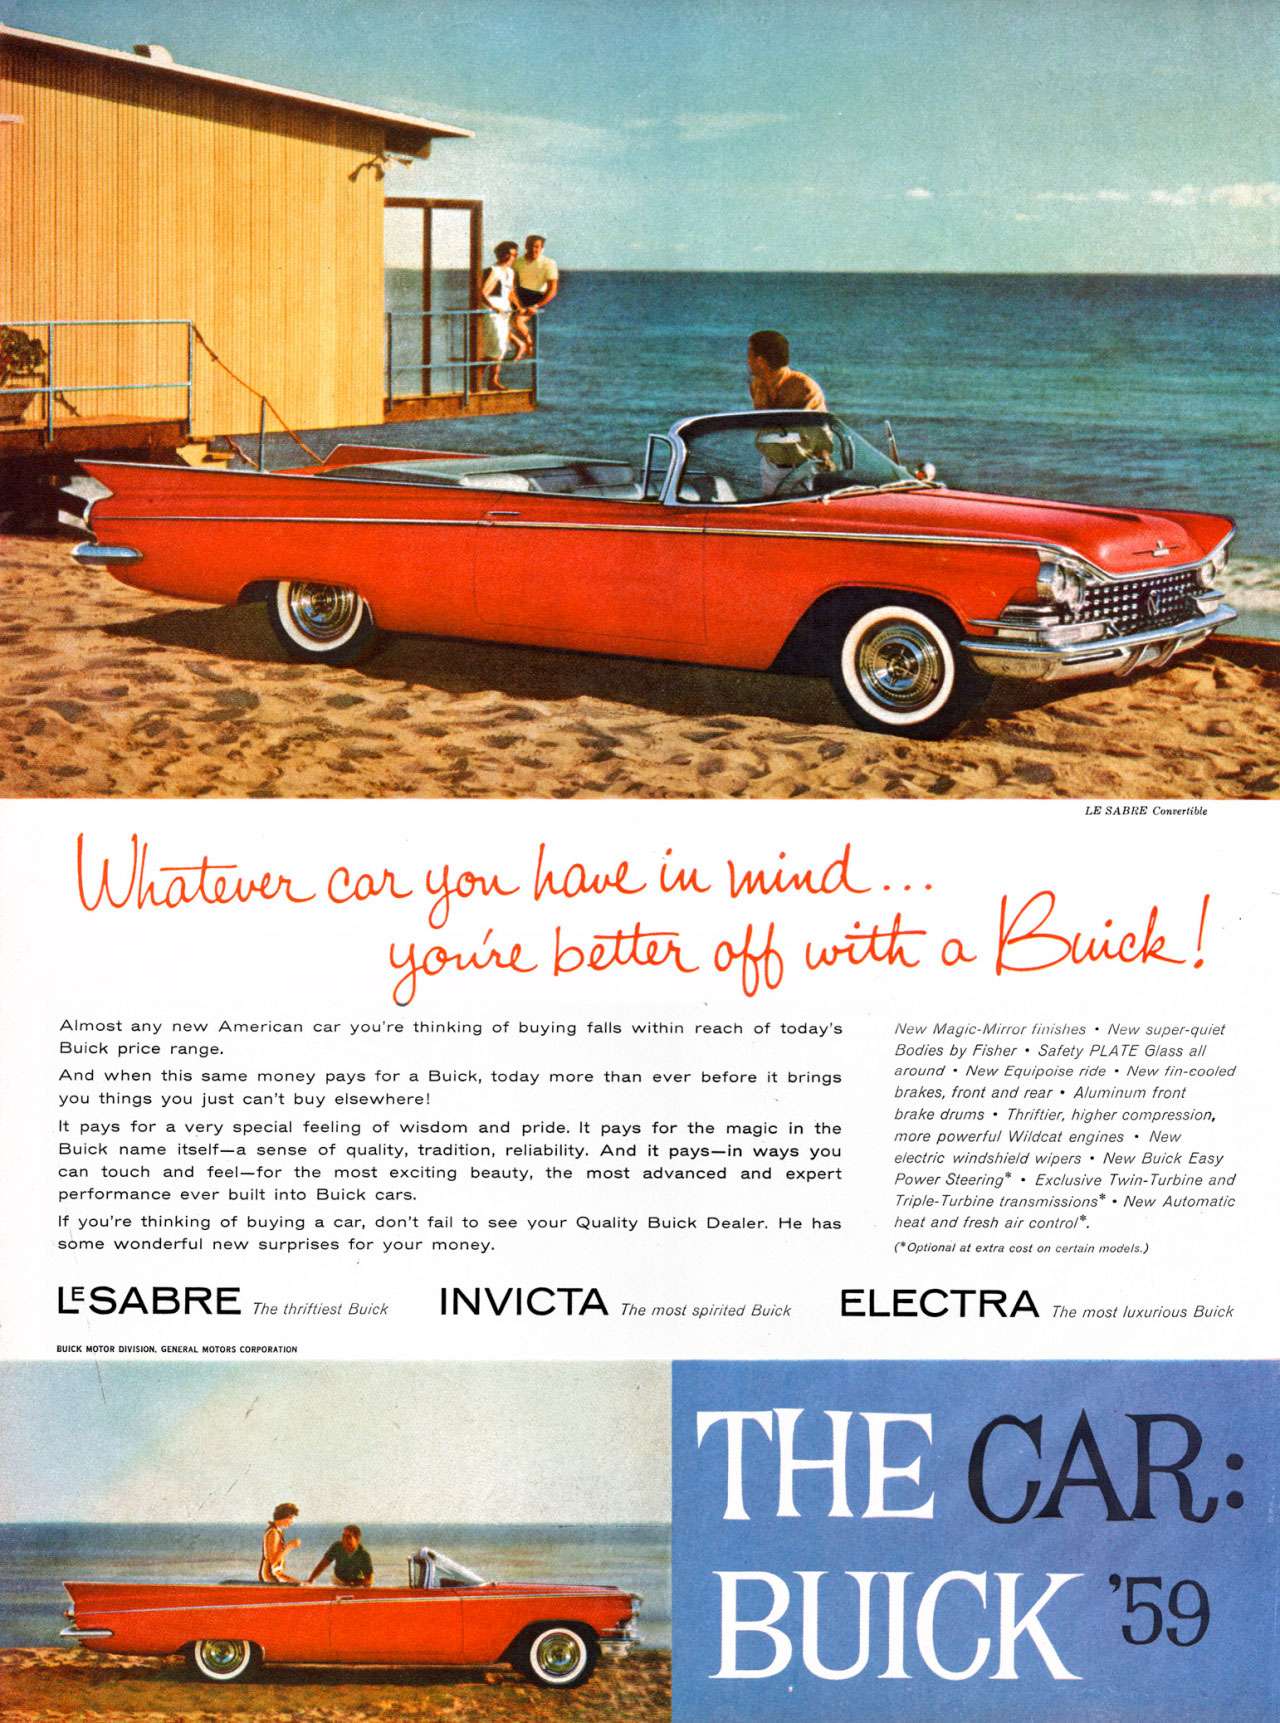 Whatever car you have in mind... you're better off with a Buick! Almost any new American car you're thinking of buying falls within reach of today's Buick price range. And when this same money pays for a Buick, today more than ever before it brings you things you just can't by elsewhere! It pays for a very special feeling of wisdom and pride. It pays for the magic in the Buick name itself—a sense of quality, tradition, reliability. And it pays—in ways you can touch and feel—for the most exciting beauty, the most advanced and expert performance ever built into Buick cars. If you're thinking of buying a car, don't fail to see your Quality Buick Dealer. He has some wonderful new surprises for your money. LE SABO: Comxthble New Mayic-Mirror IMishes - New super-quiet Bodies by Fisher - Safety PLATE LASS all around - New Equipoise ride - New fin-eoolecl brakes, front and rear - AlU1,171/177 front brake o,ums - Thriftier, higher compression, tnore powerful Wildcat engines - New elect, windshield wipers - New Buick Easy Power Steering. - Exclusive Twin-Turbine and Triple-Turbine transmissions. - New Automatic heat and fresh air control.. ,Optional at extra cost on certain models, IISAEiRE The thriftiest Buick INVICTA The Most spirited Buick ELECTRA The most luxurious Buick BUICK MOTOR GENERAL MOTORS CORPORATION